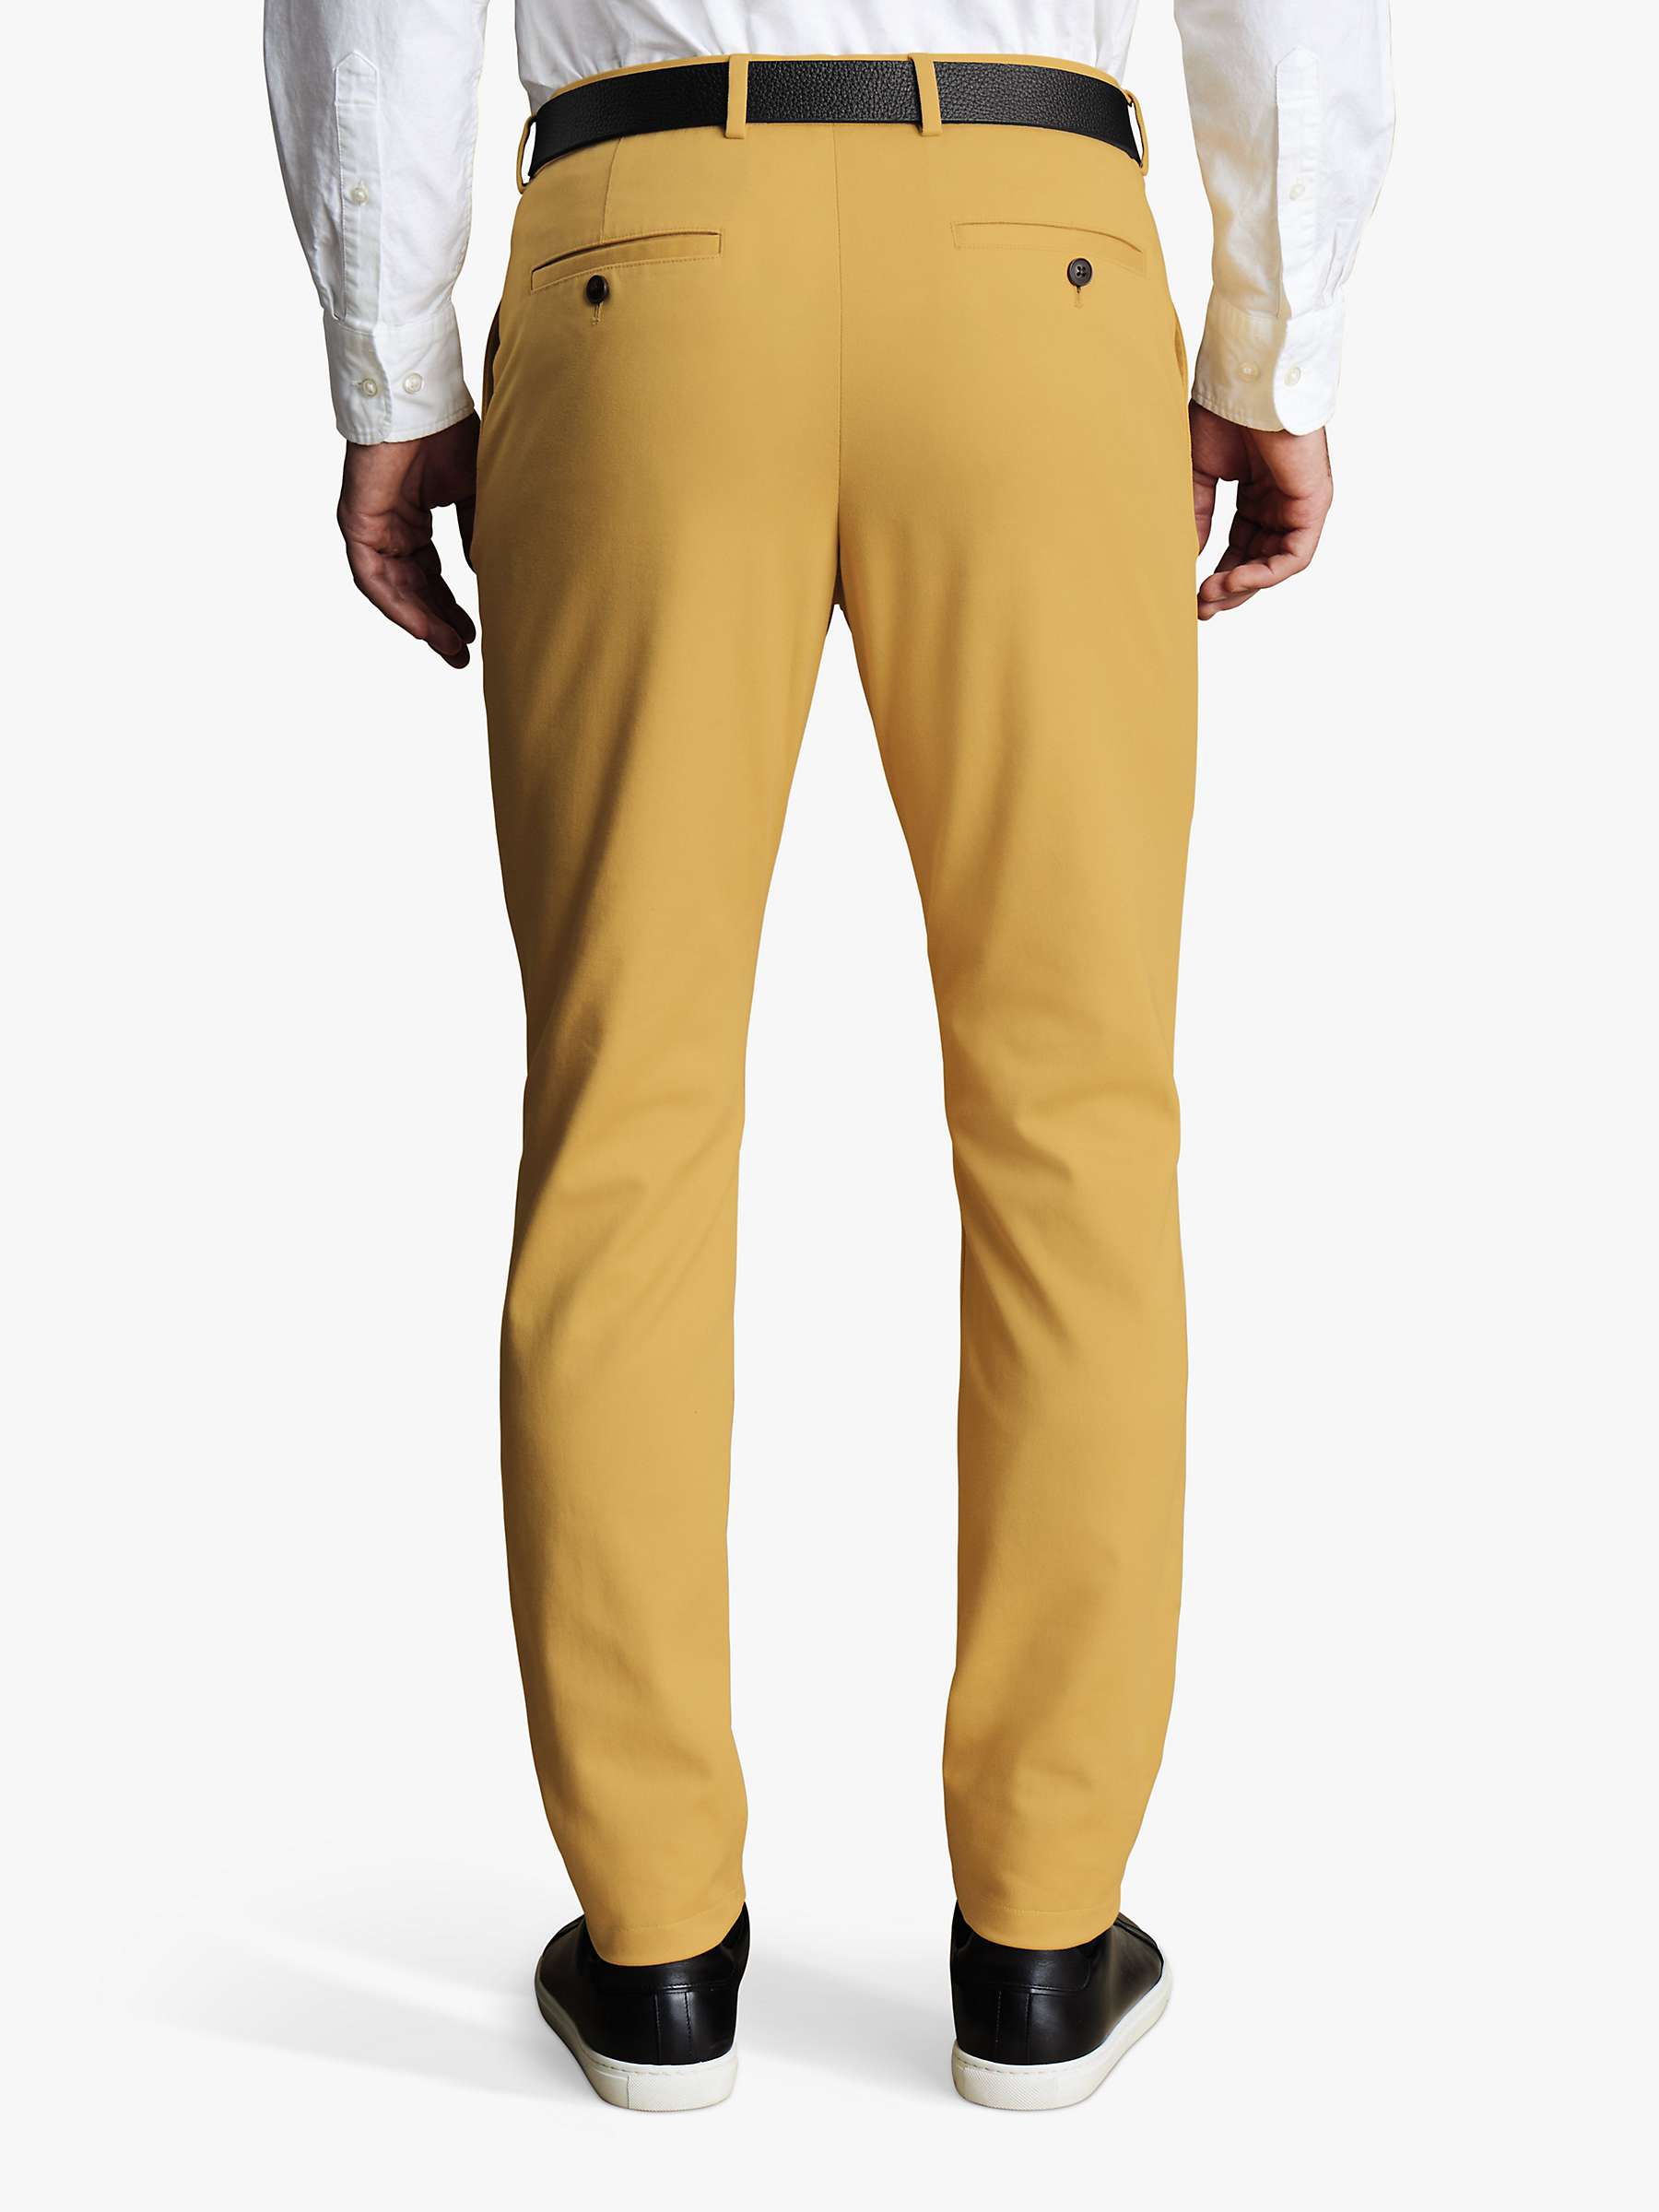 Buy Charles Tyrwhitt Classic Fit Ultimate Non-Iron Chinos Online at johnlewis.com